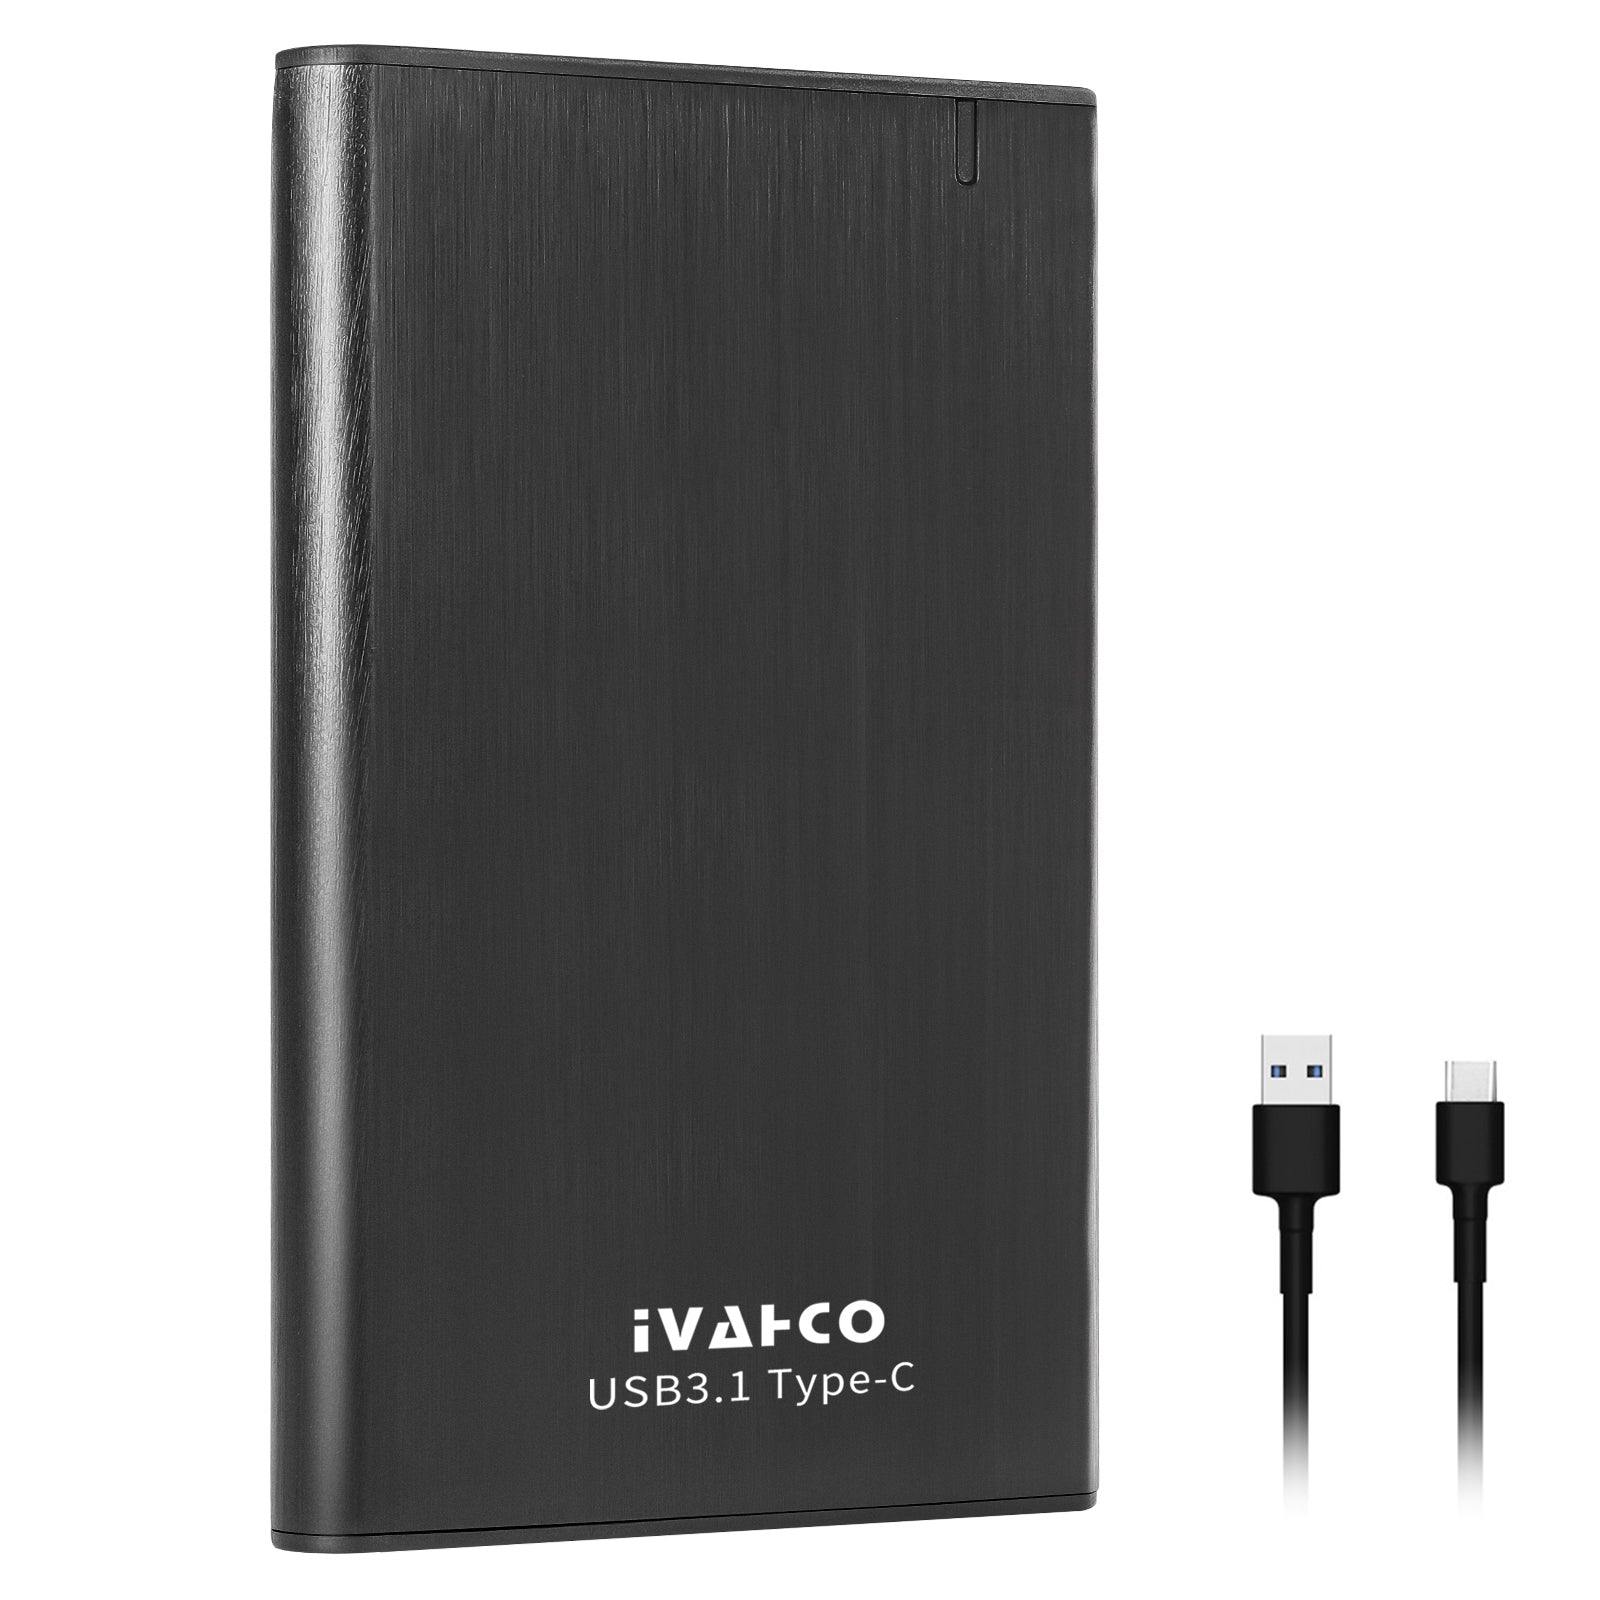 IVAHCO 1TB Type-C USB3.1 2.5" HDD External Case Plug and Play Brushed Metal Solid State Drive Enclosure - Black